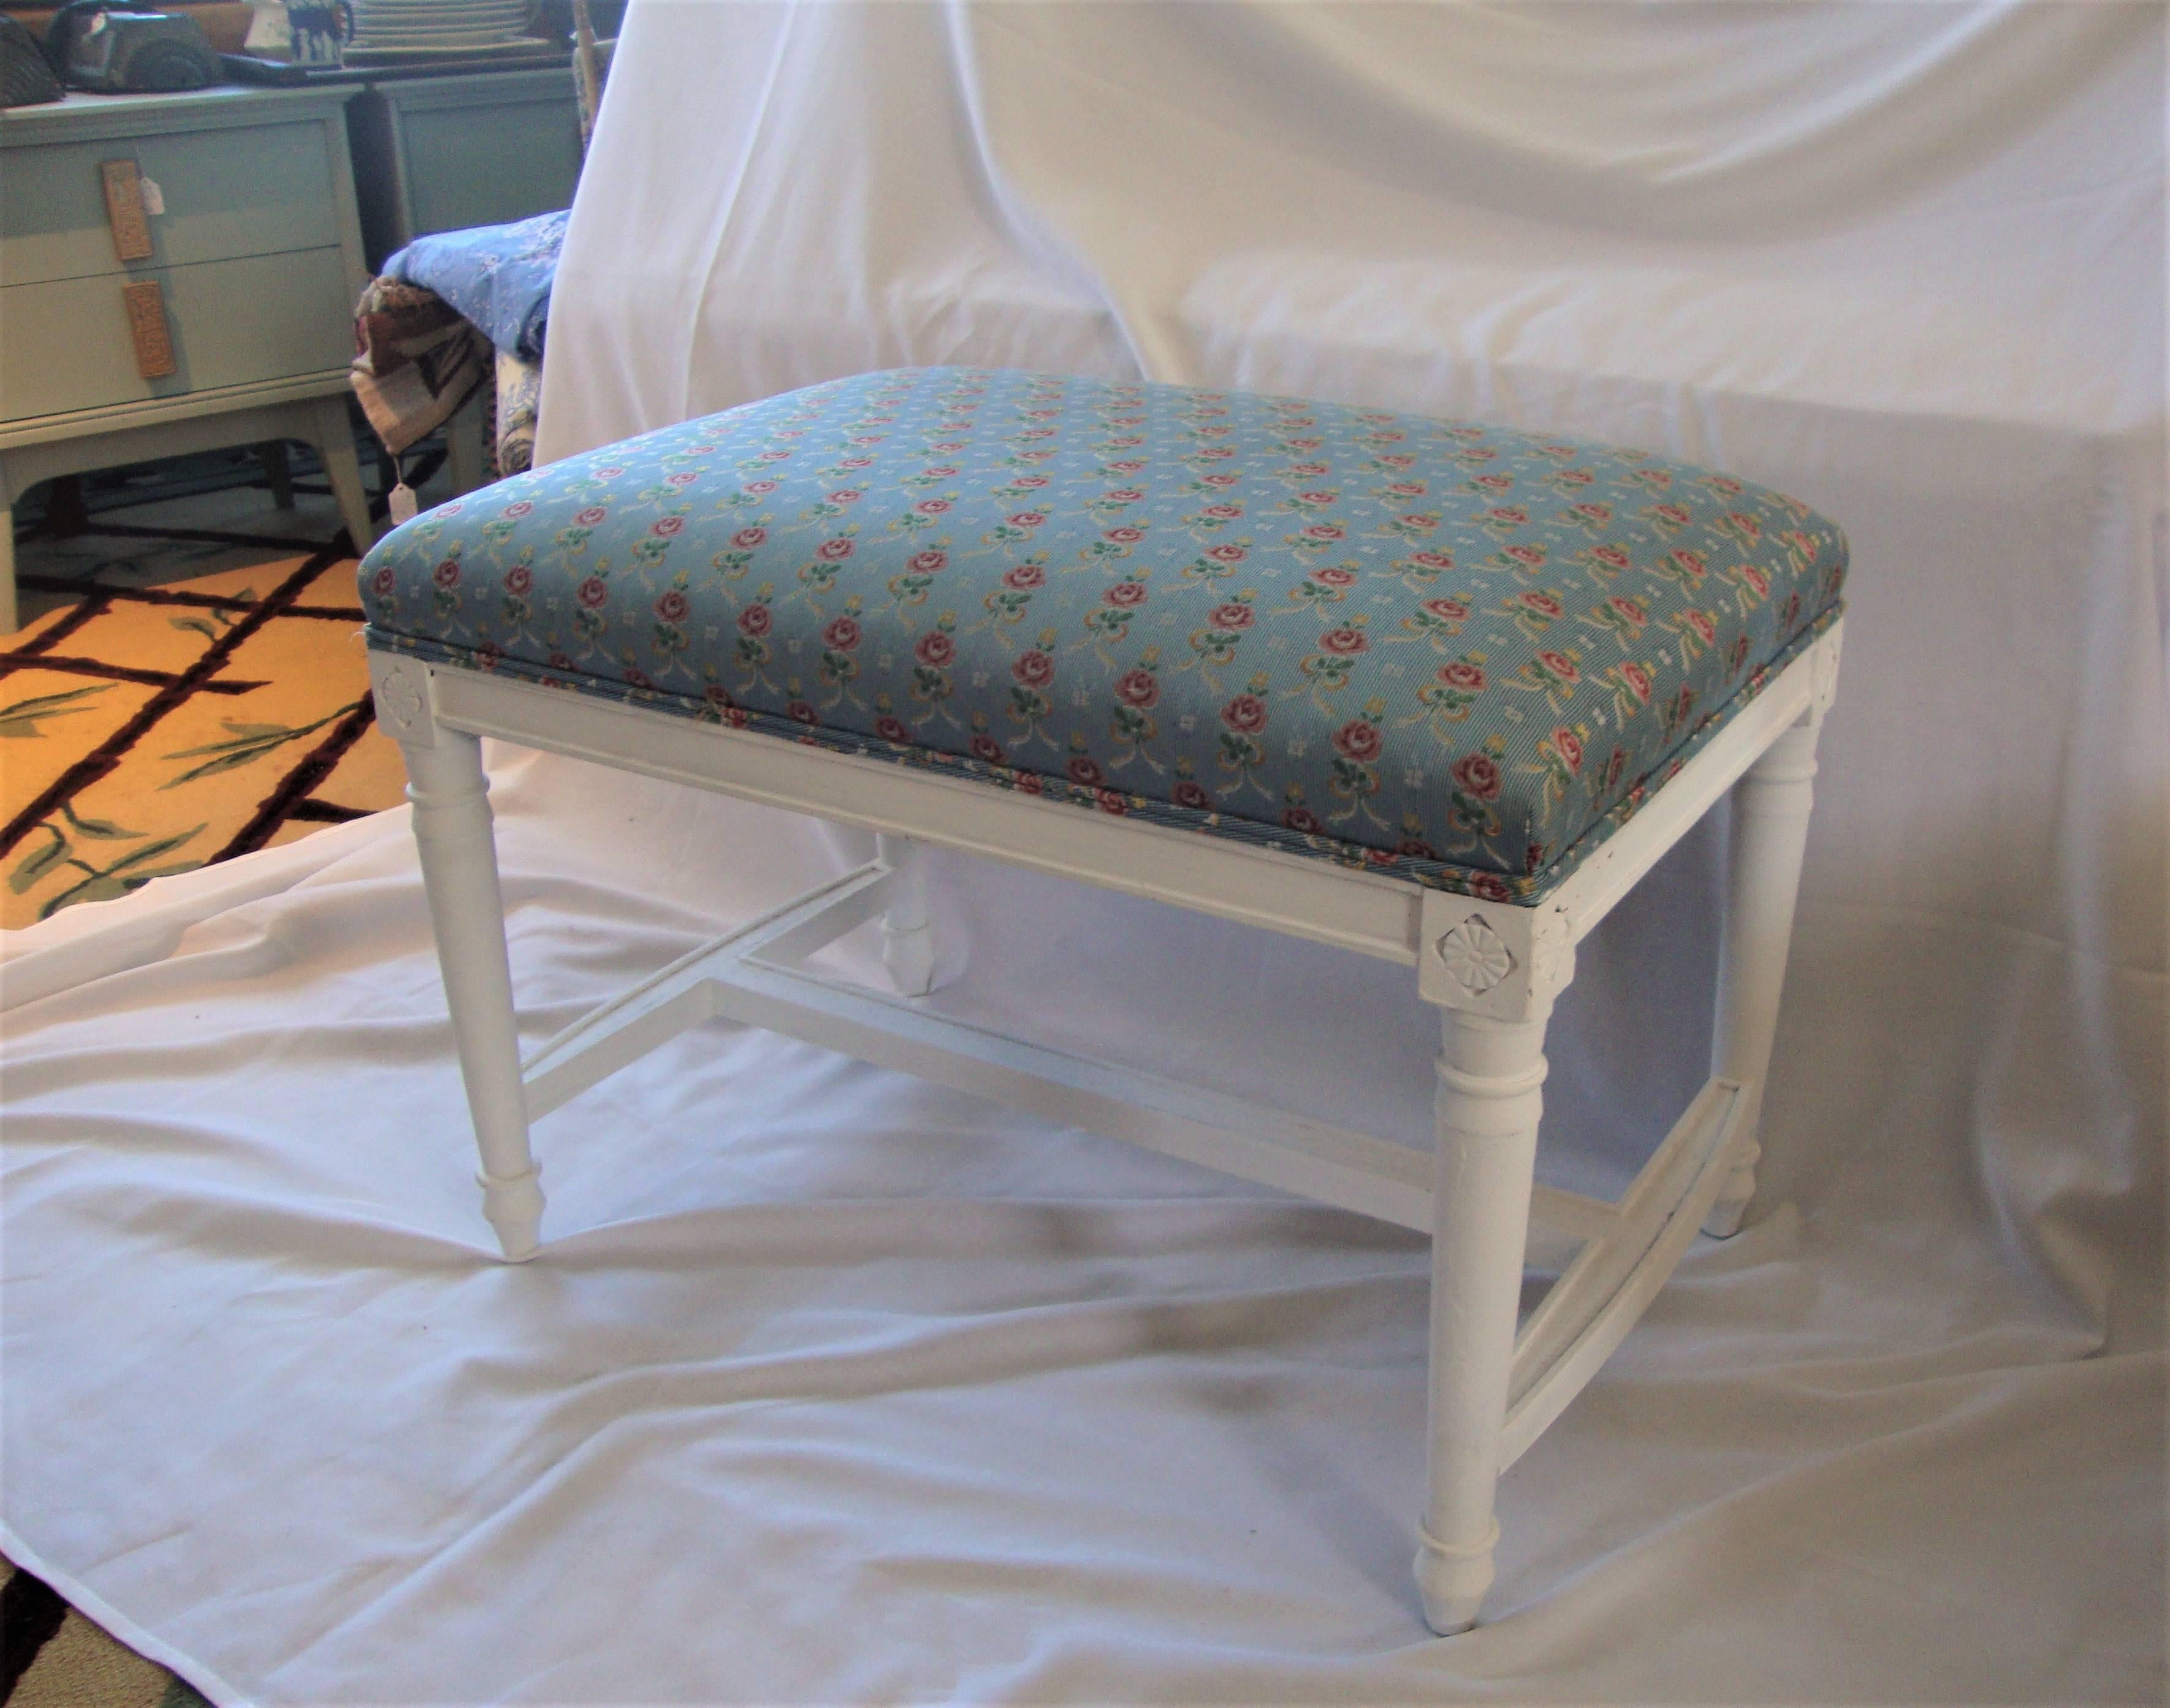 A Fantastic Painted Pure White Louis XVI Bench Displaying Beautifully Clean Sea Blue Backdrop with Pretty Pinks and Whites Flowers -- adding a touch of French Country.  Medallions are carved in the legs - giving more character to these fabulously